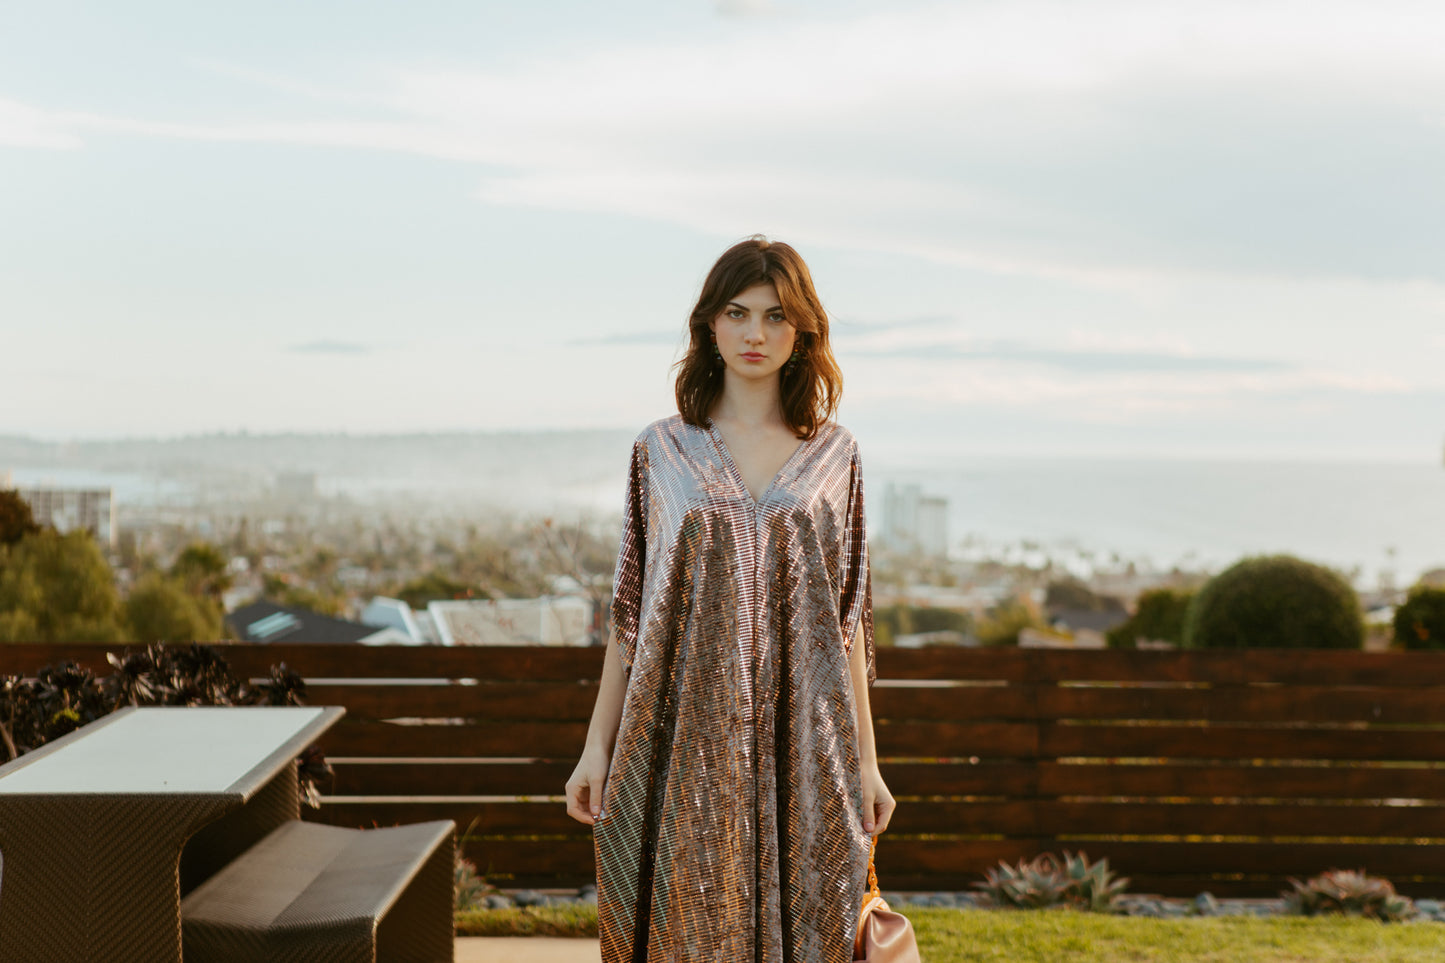 Full length velveteen caftan dress with a geometric metallic rose gold embellishments. Featuring a v-neck, batwing sleeves, and a full length hem. Retro futuristic bohemian style.